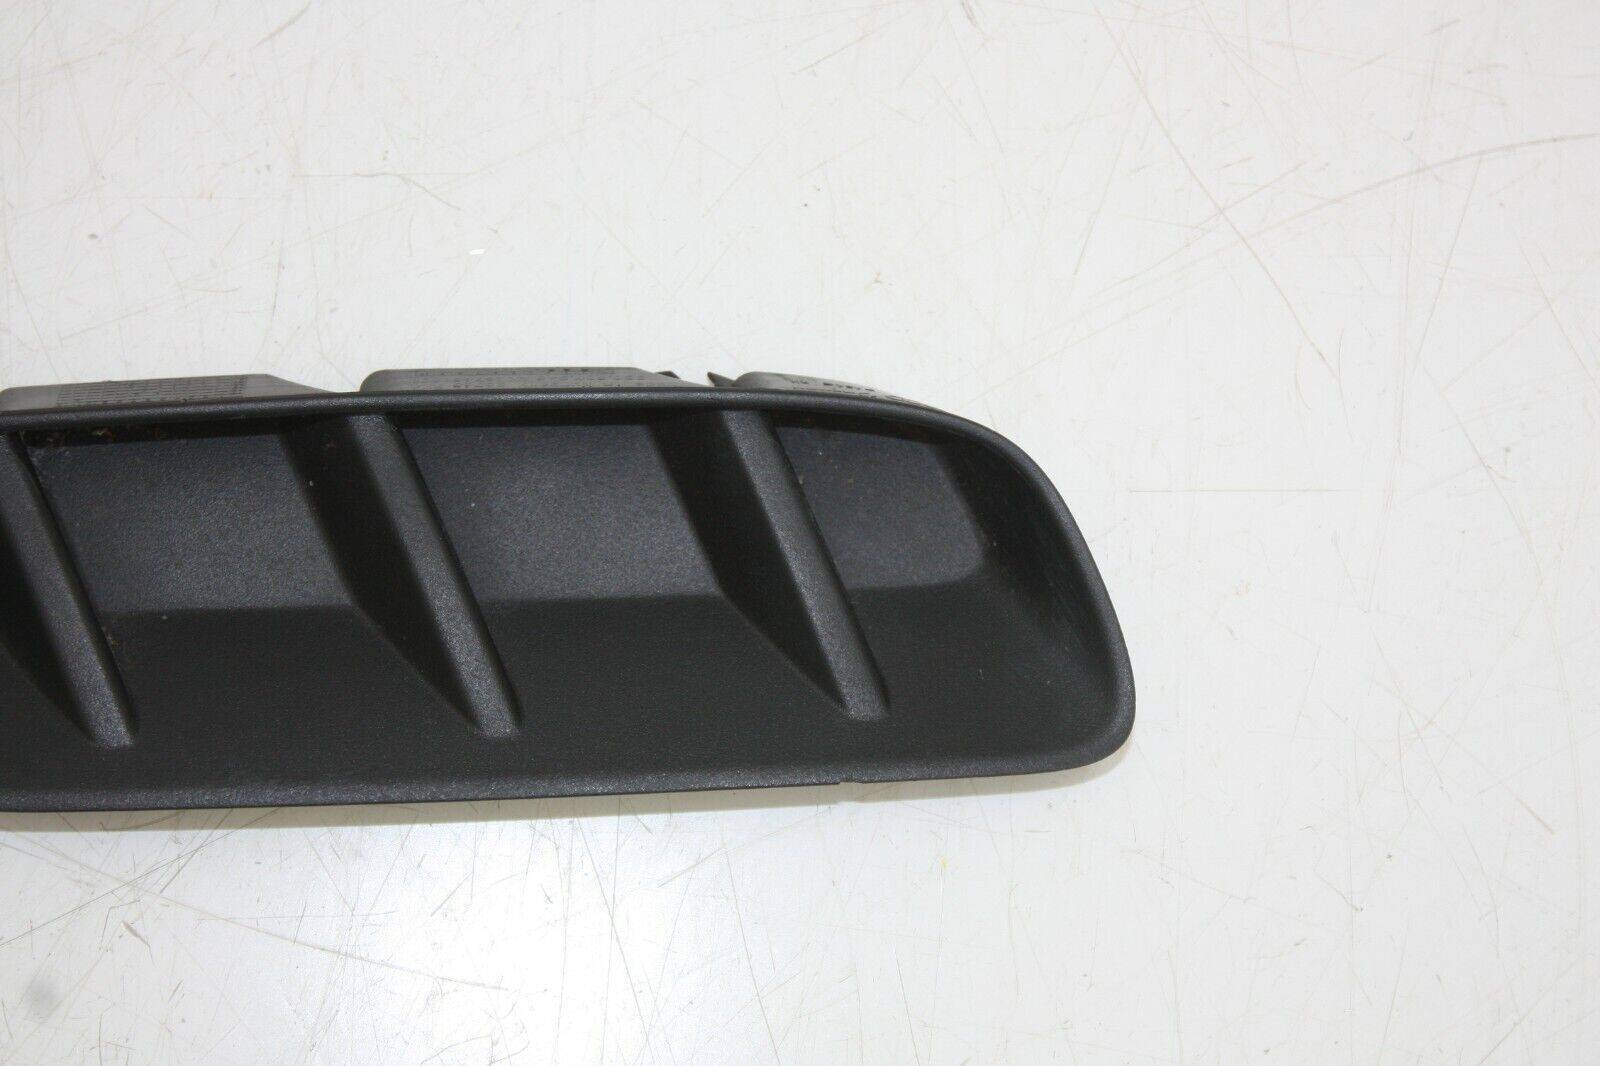 Audi-TT-Coupe-Roadster-Right-Side-Air-Outlet-Trim-8S0807946-Genuine-175869883766-3